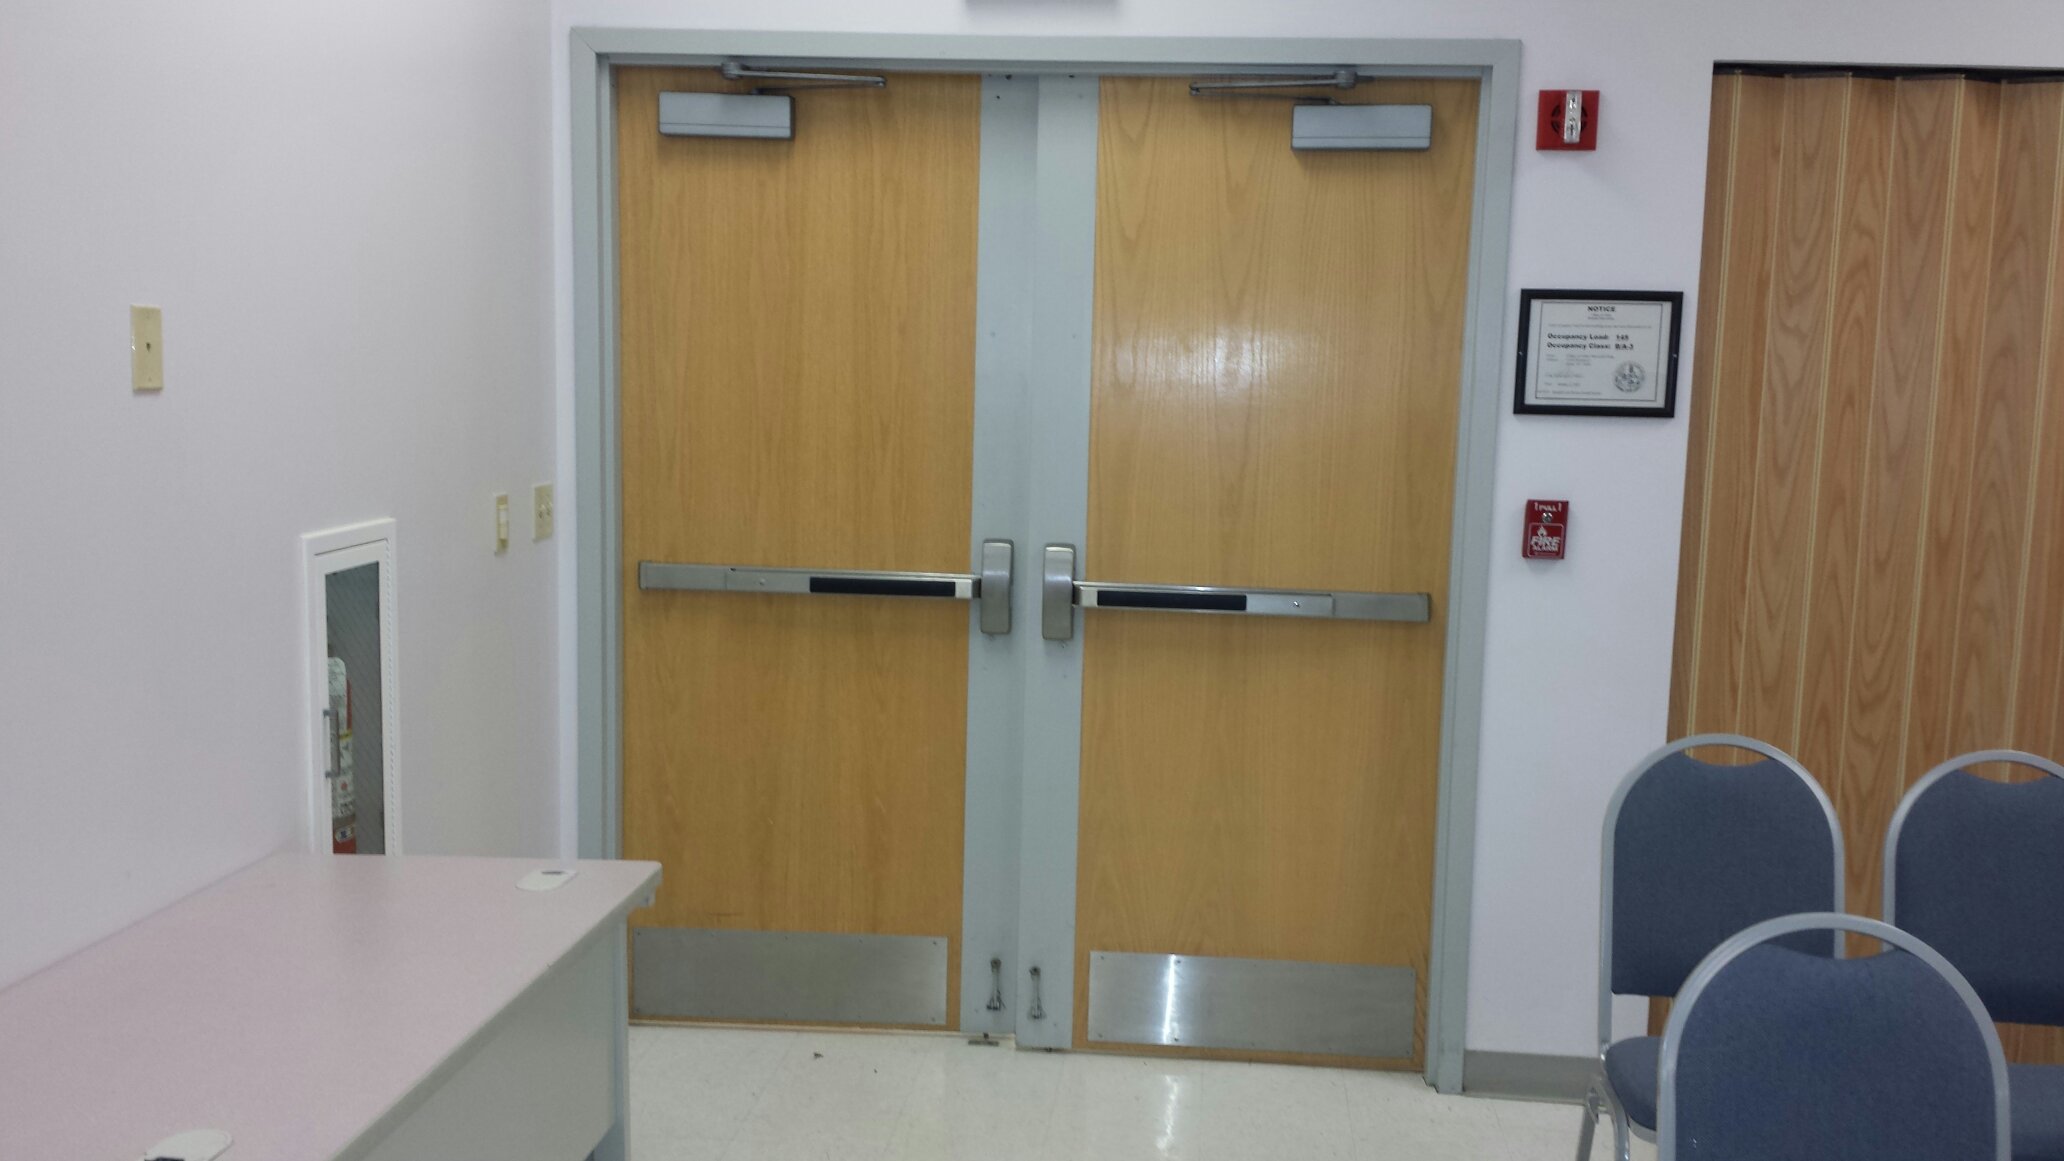 Wooden Fire Doors with emergency exit bars and closers